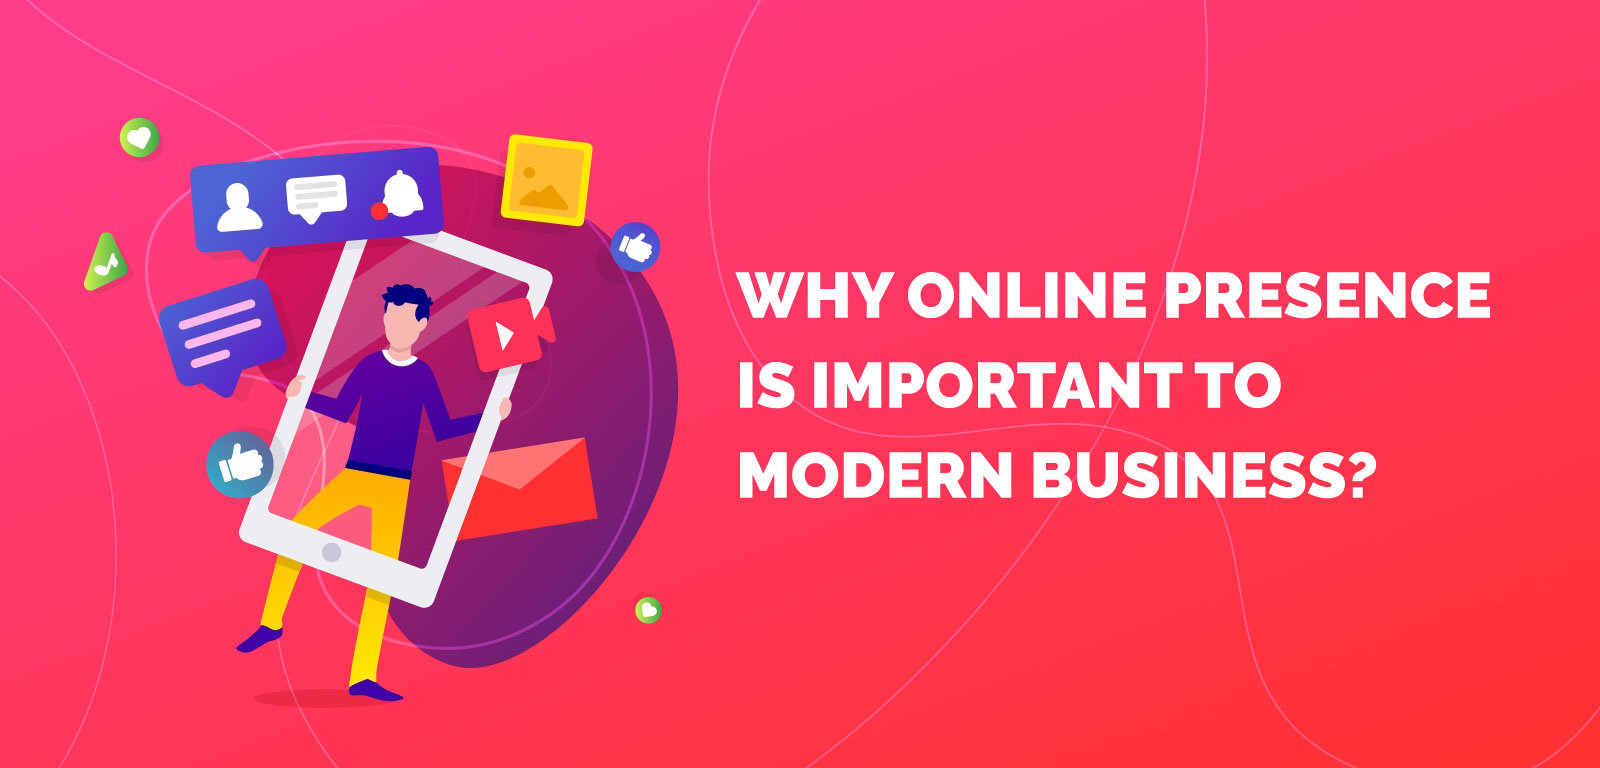 Why online presence is important to modern business?